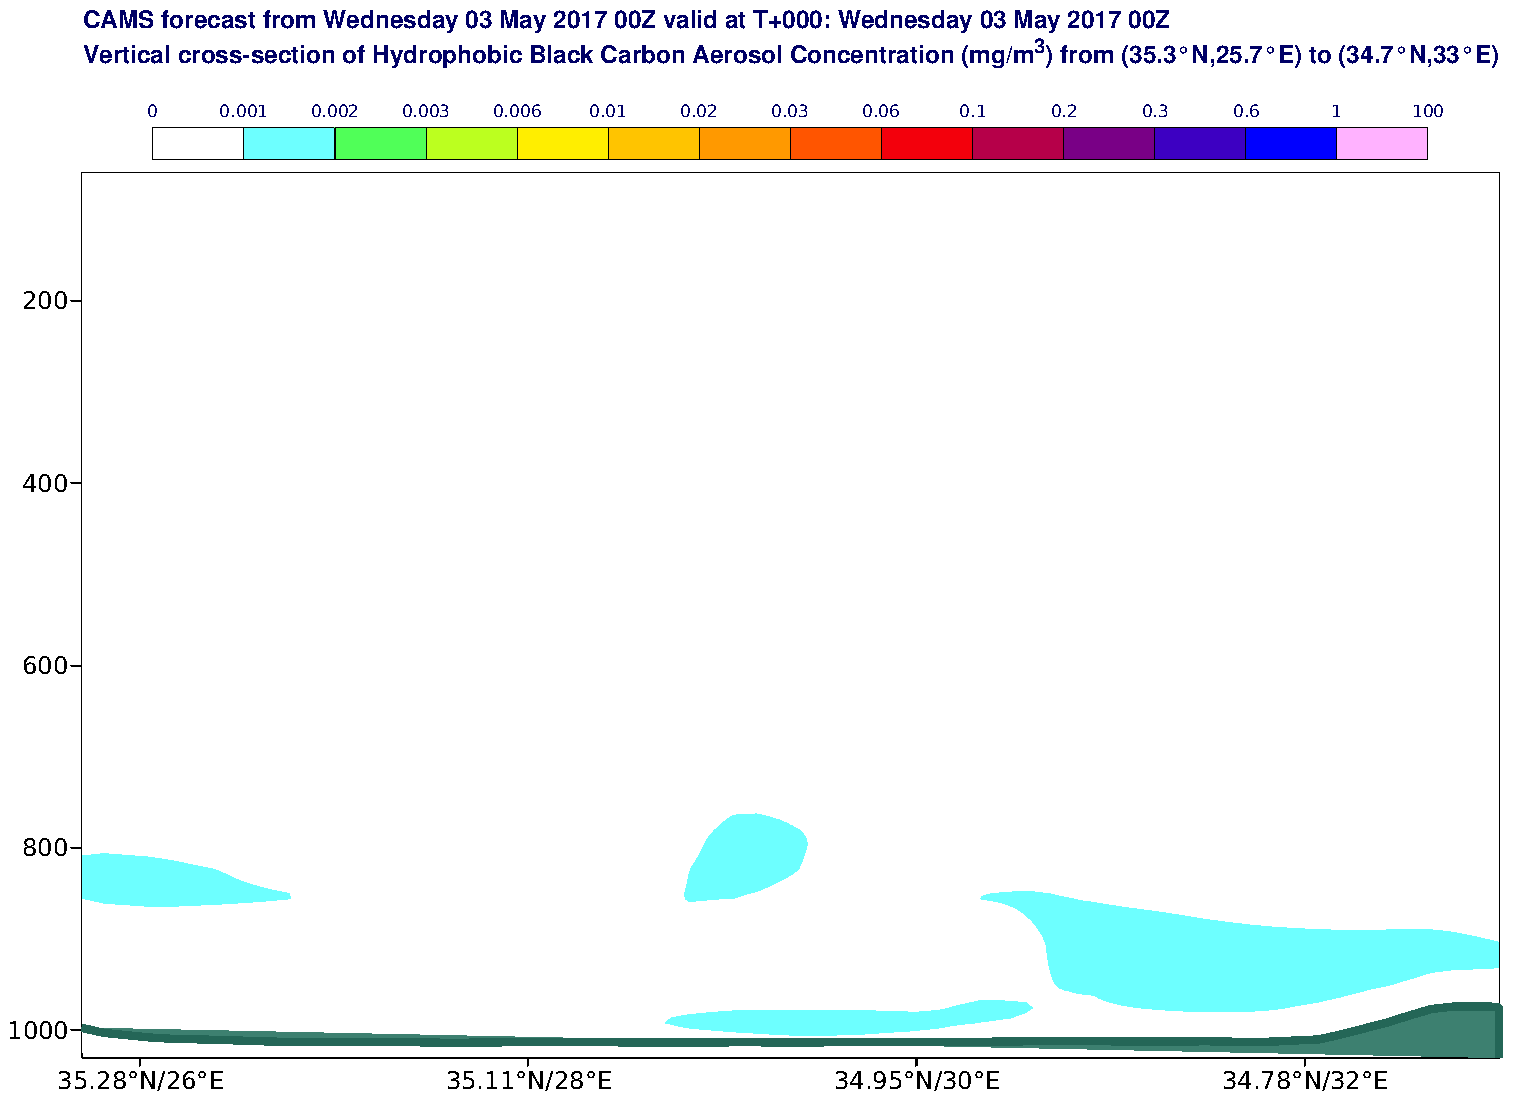 Vertical cross-section of Hydrophobic Black Carbon Aerosol Concentration (mg/m3) valid at T0 - 2017-05-03 00:00